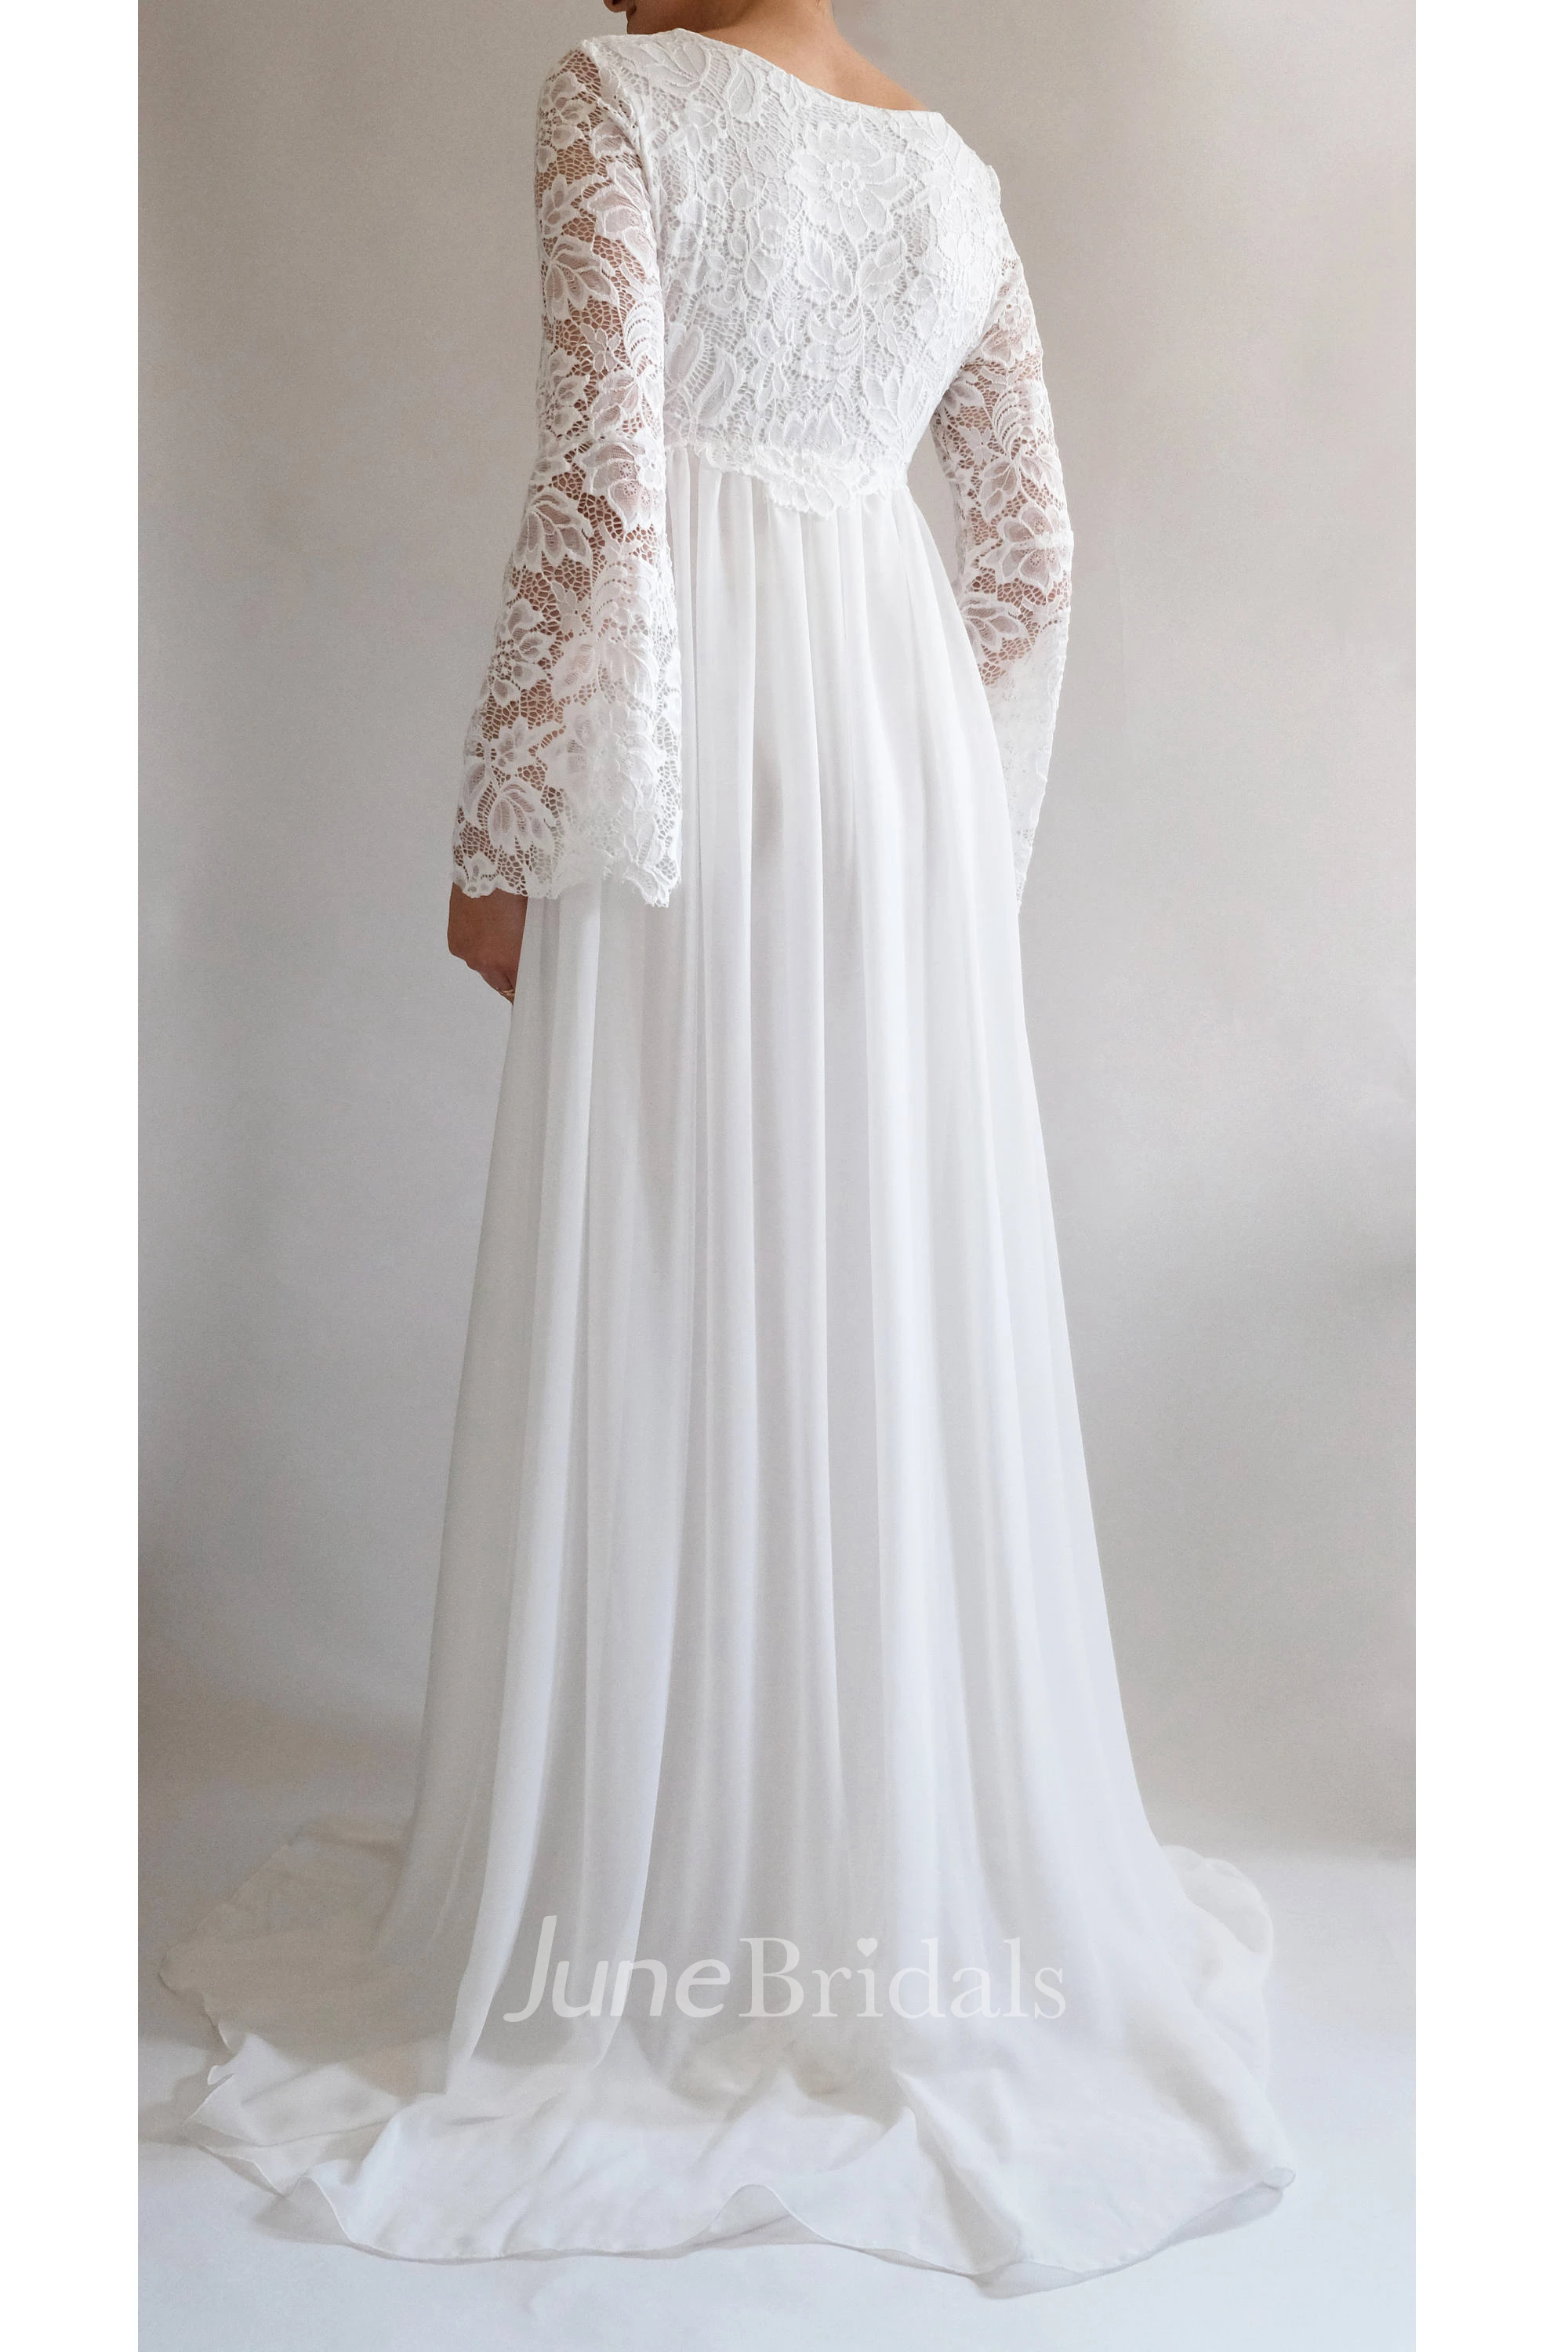 Casual Bohemian Long-Sleeve Wedding Dress Simple Maternity Lace Chiffon  Square Neck Empire Waist Bride Gown - June Bridals